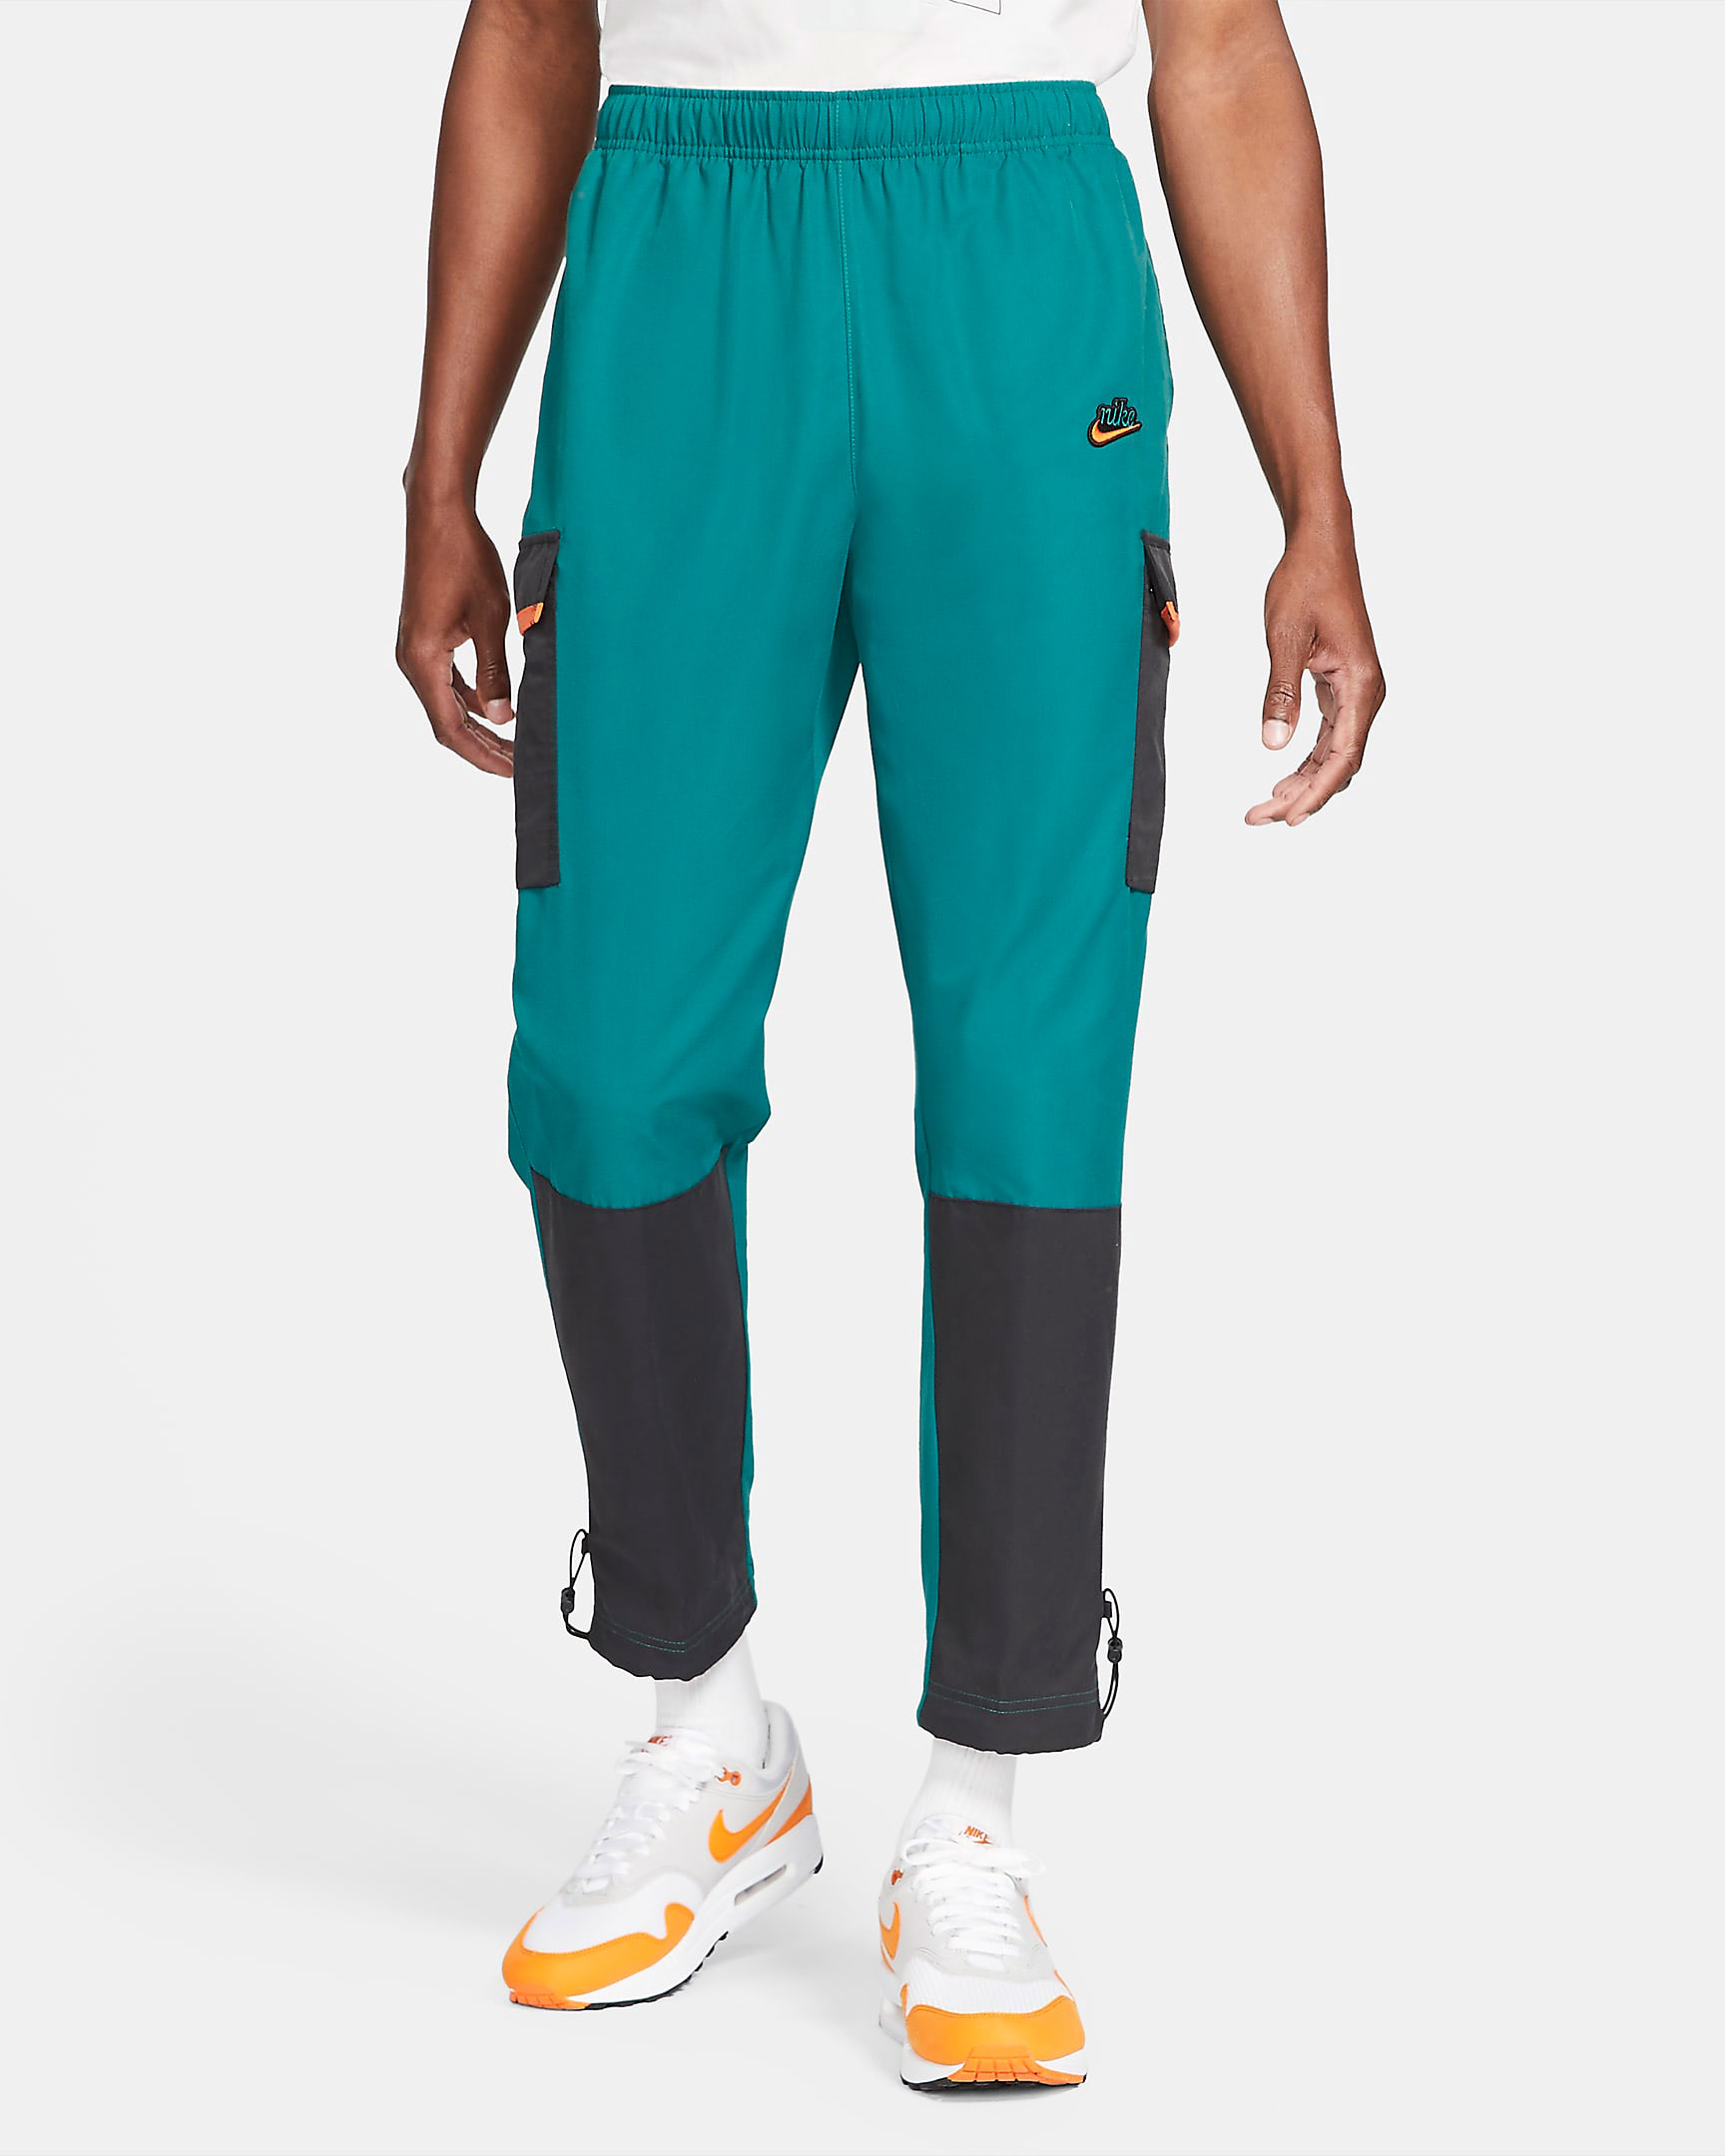 nike-air-griffey-max-1-freshwater-2021-pants-match-1